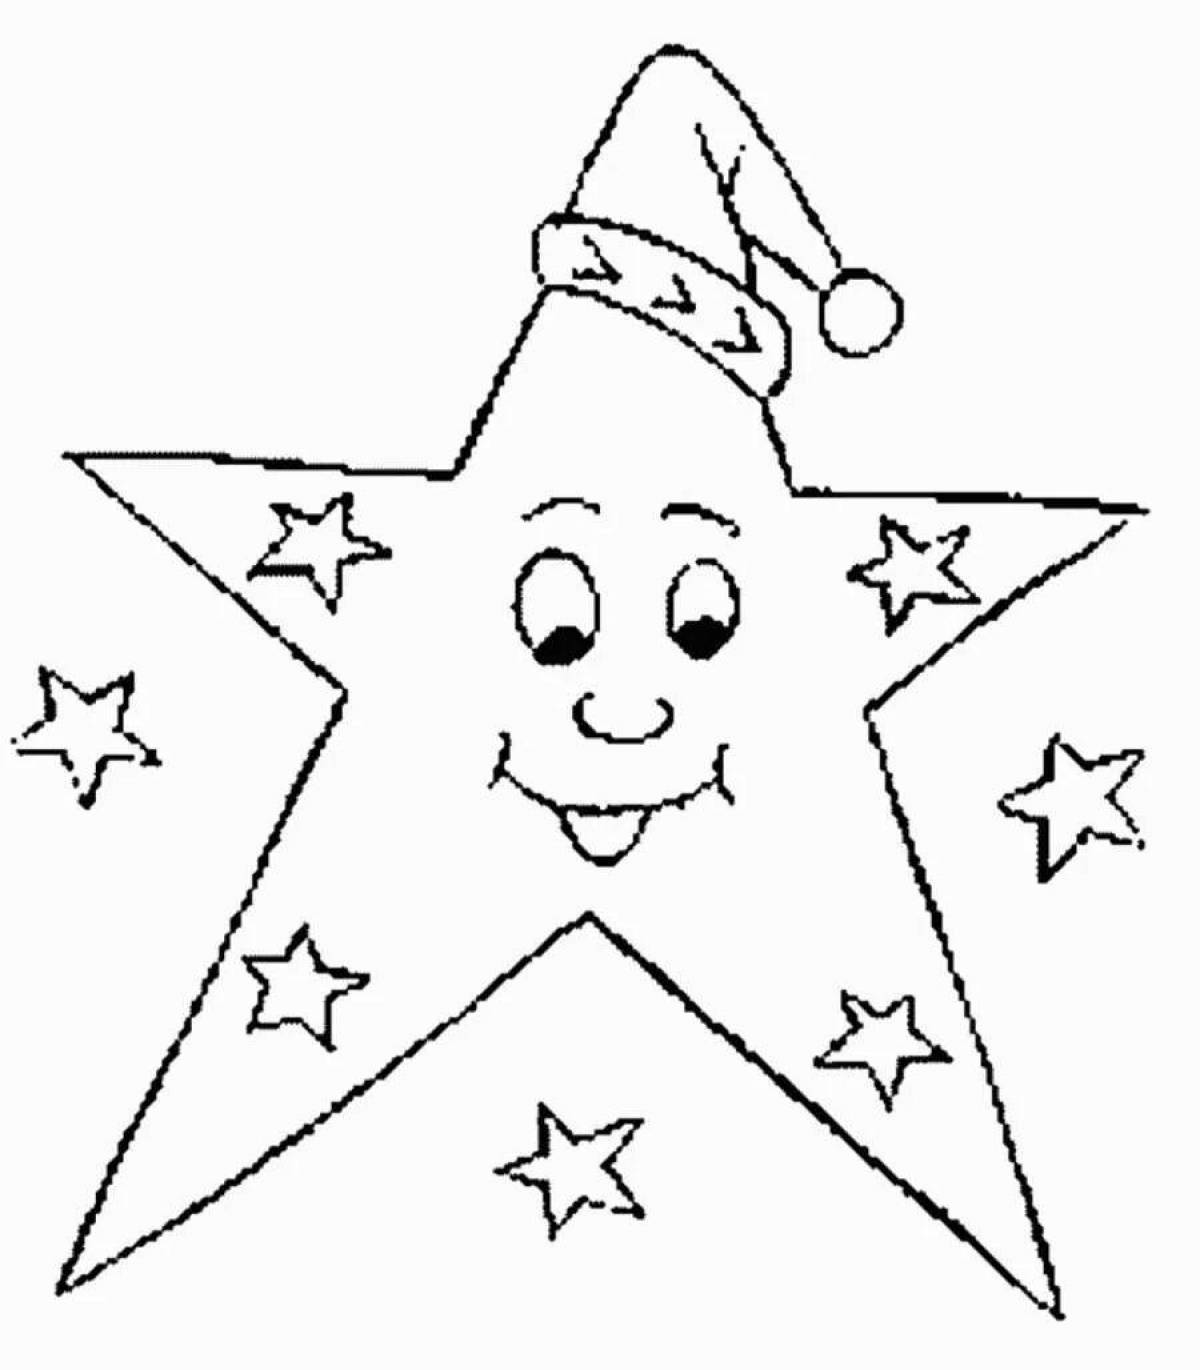 Colour coloring star for kids 3-4 years old